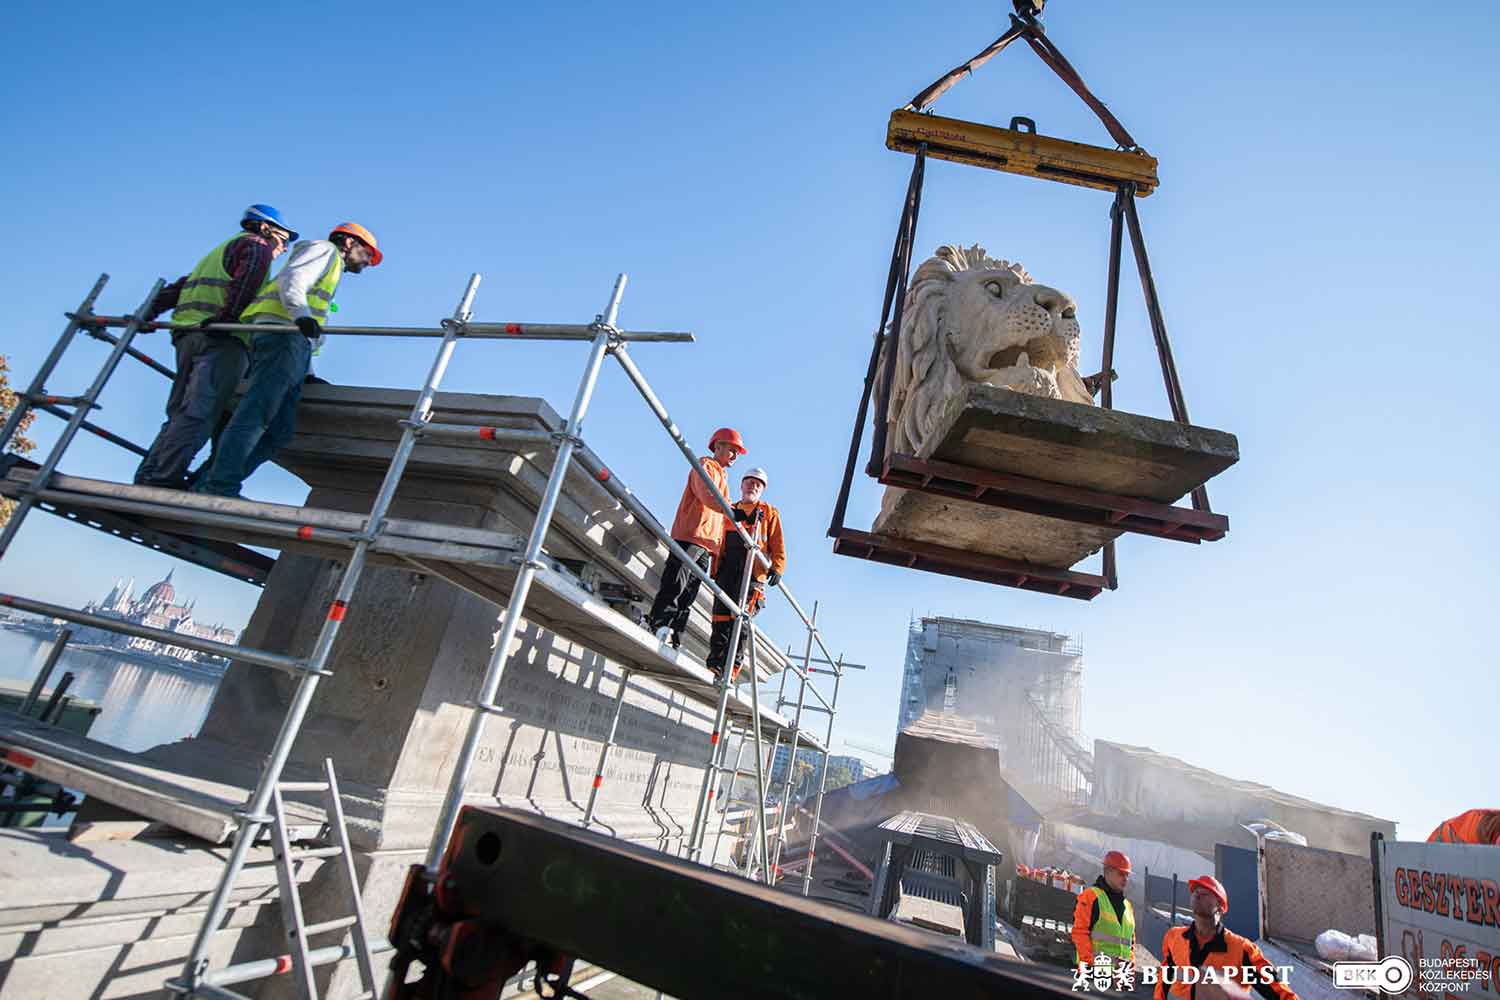 Construction workers on scaffolding watch as equipment is used to lift part of a stone lion